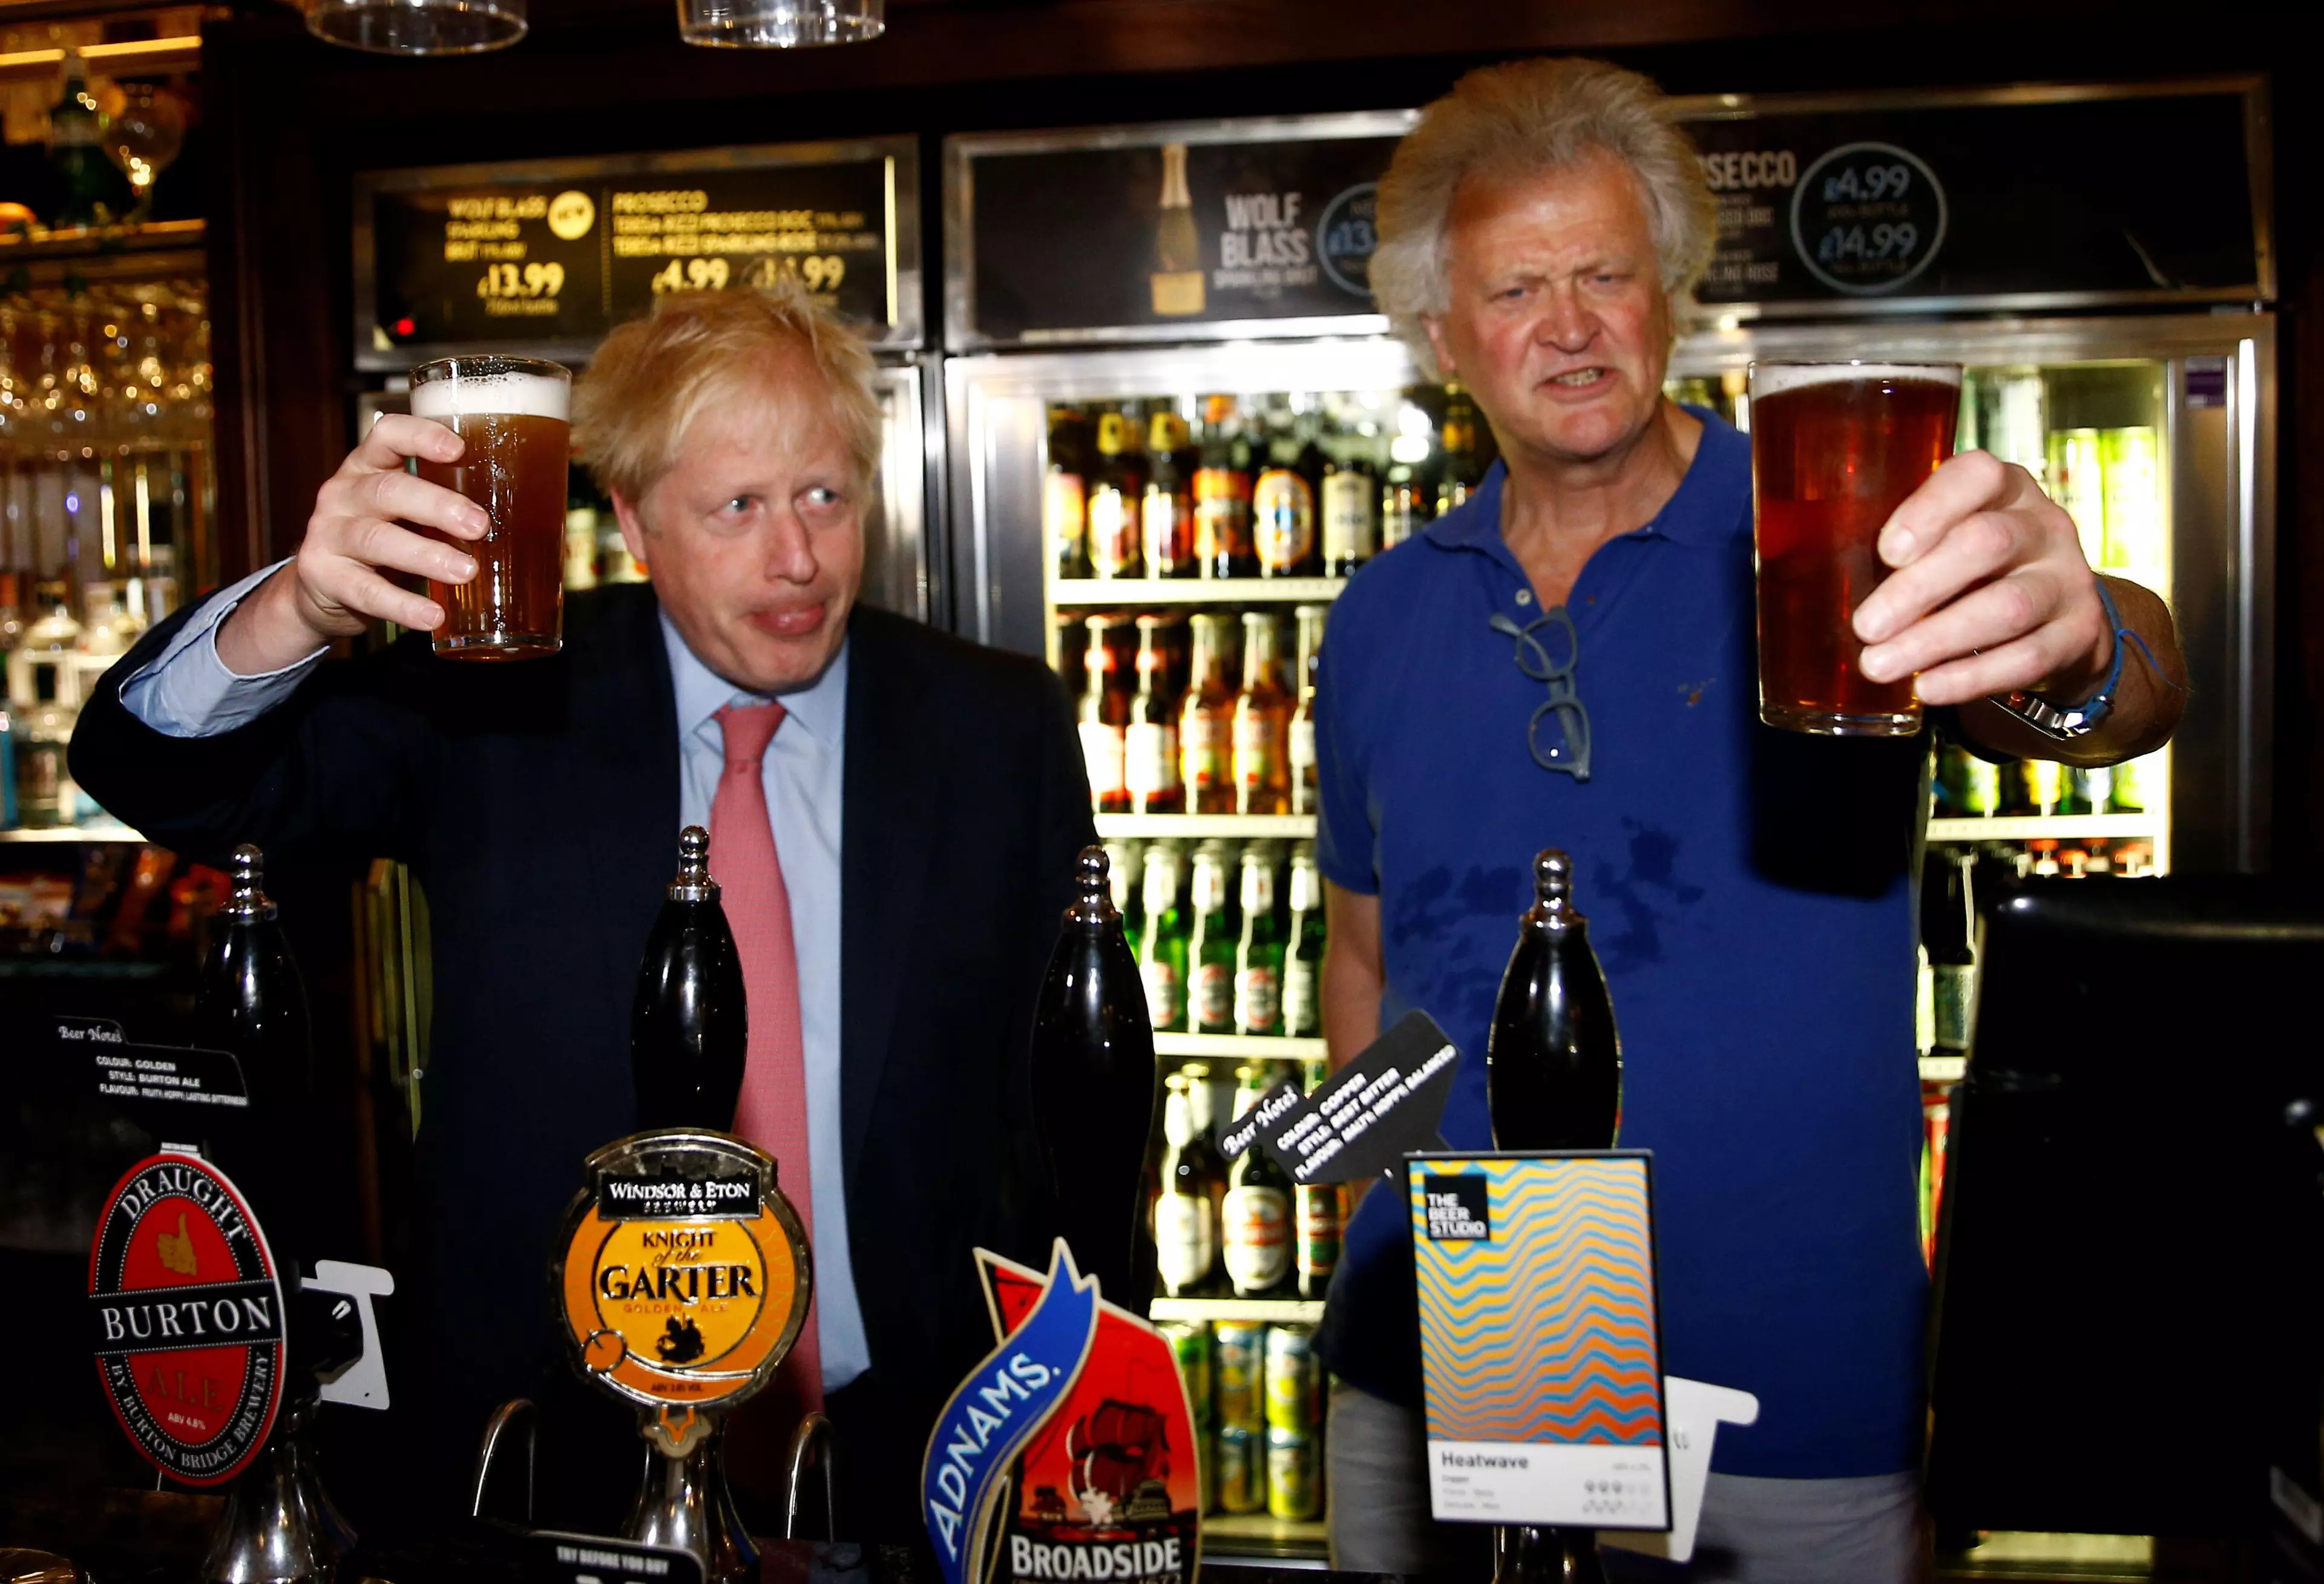 Martin with Boris Johnson, though he has occasionally criticised the Prime Minister.